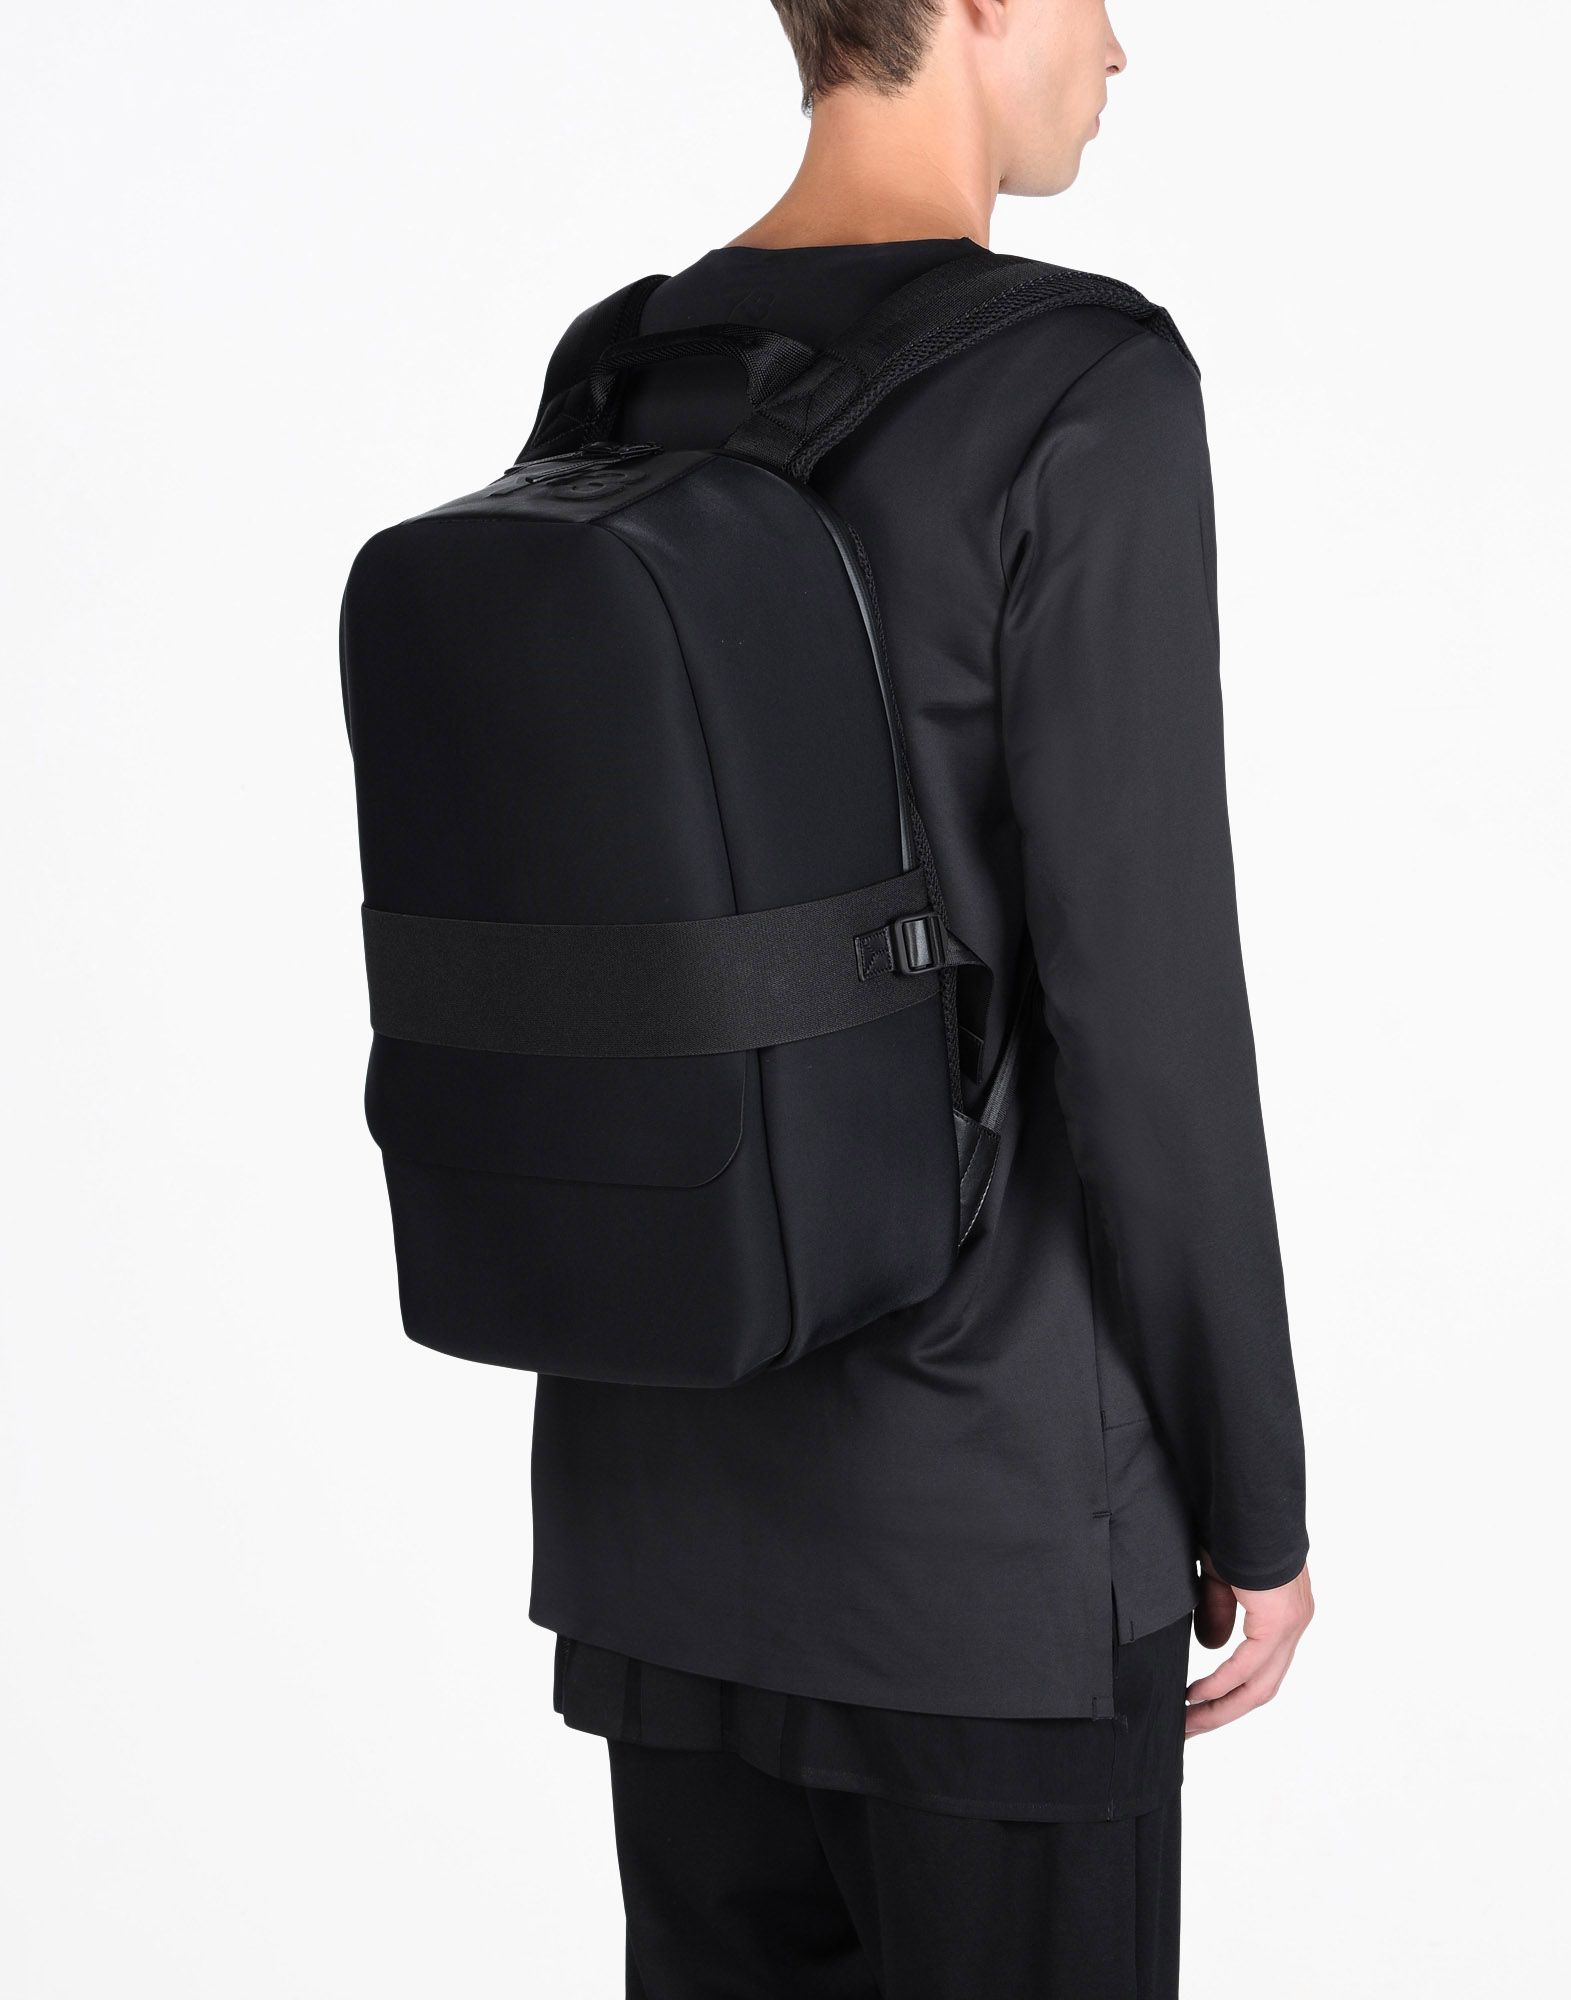 Y 3 QASA BACKPACK for Women | Adidas Y-3 Official Store